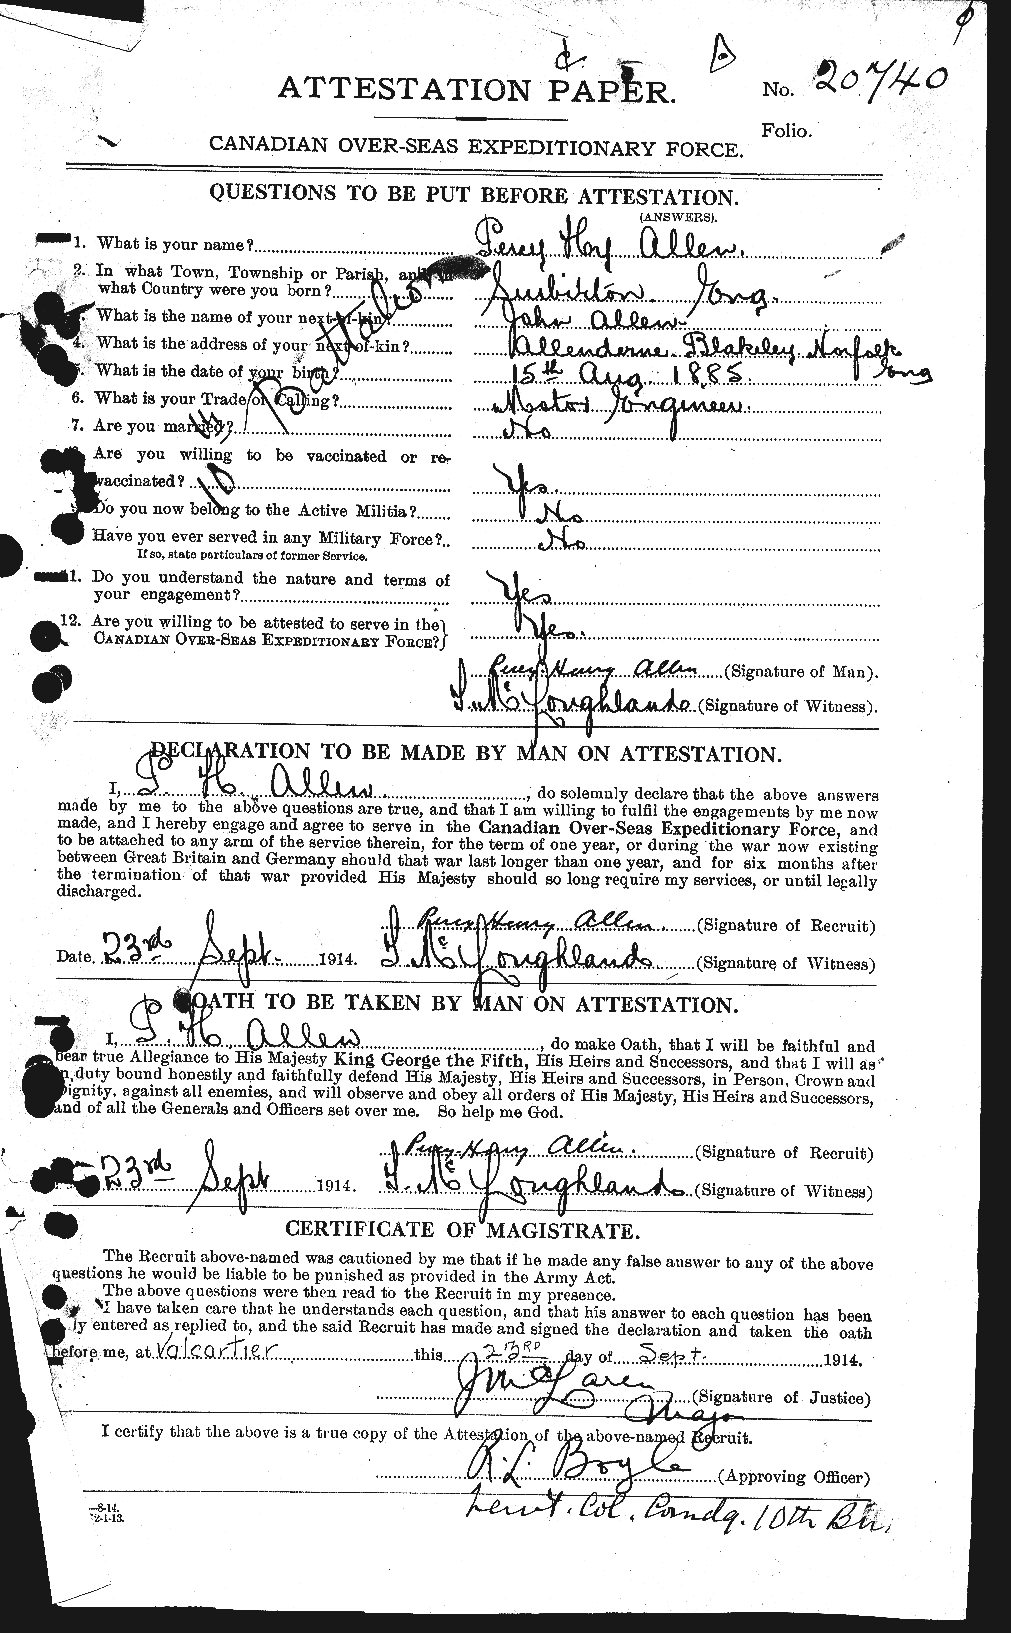 Personnel Records of the First World War - CEF 207103a